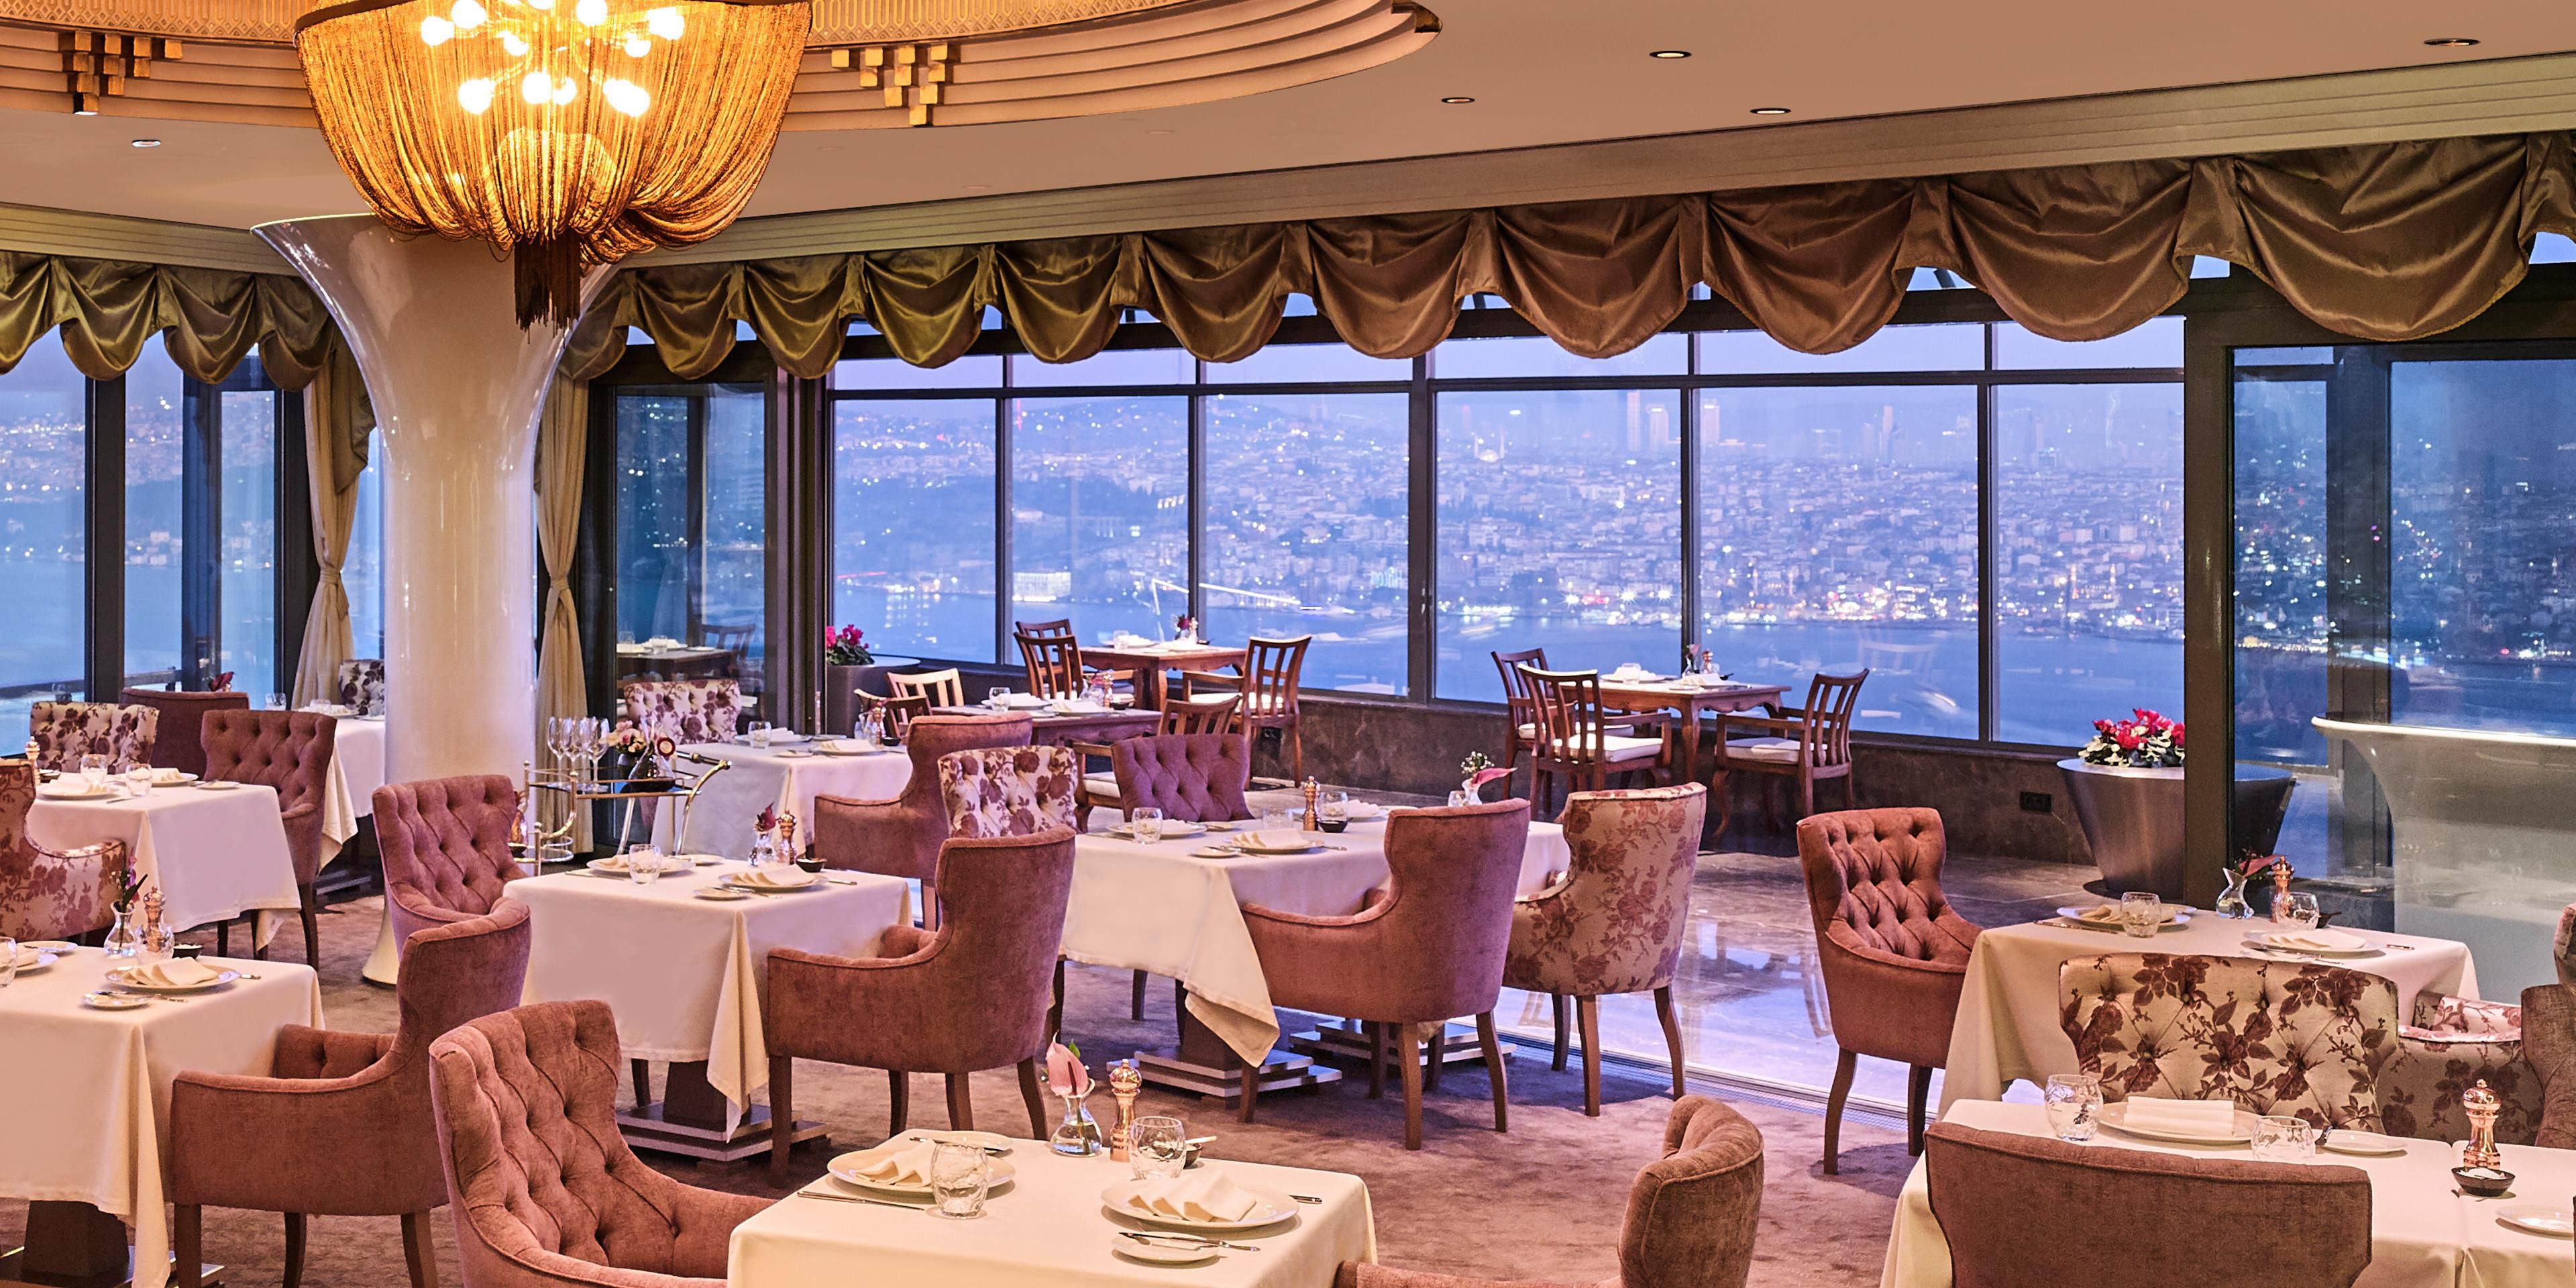 Safran offers the finest in Turkish and Ottoman cuisine and spectacular views of the Bosphorus.   The exquisite dining room is beautifully decorated, with an elegant covered terrace. Enjoy live classical fasil music as you enjoy an authentic meal in this unique setting. 